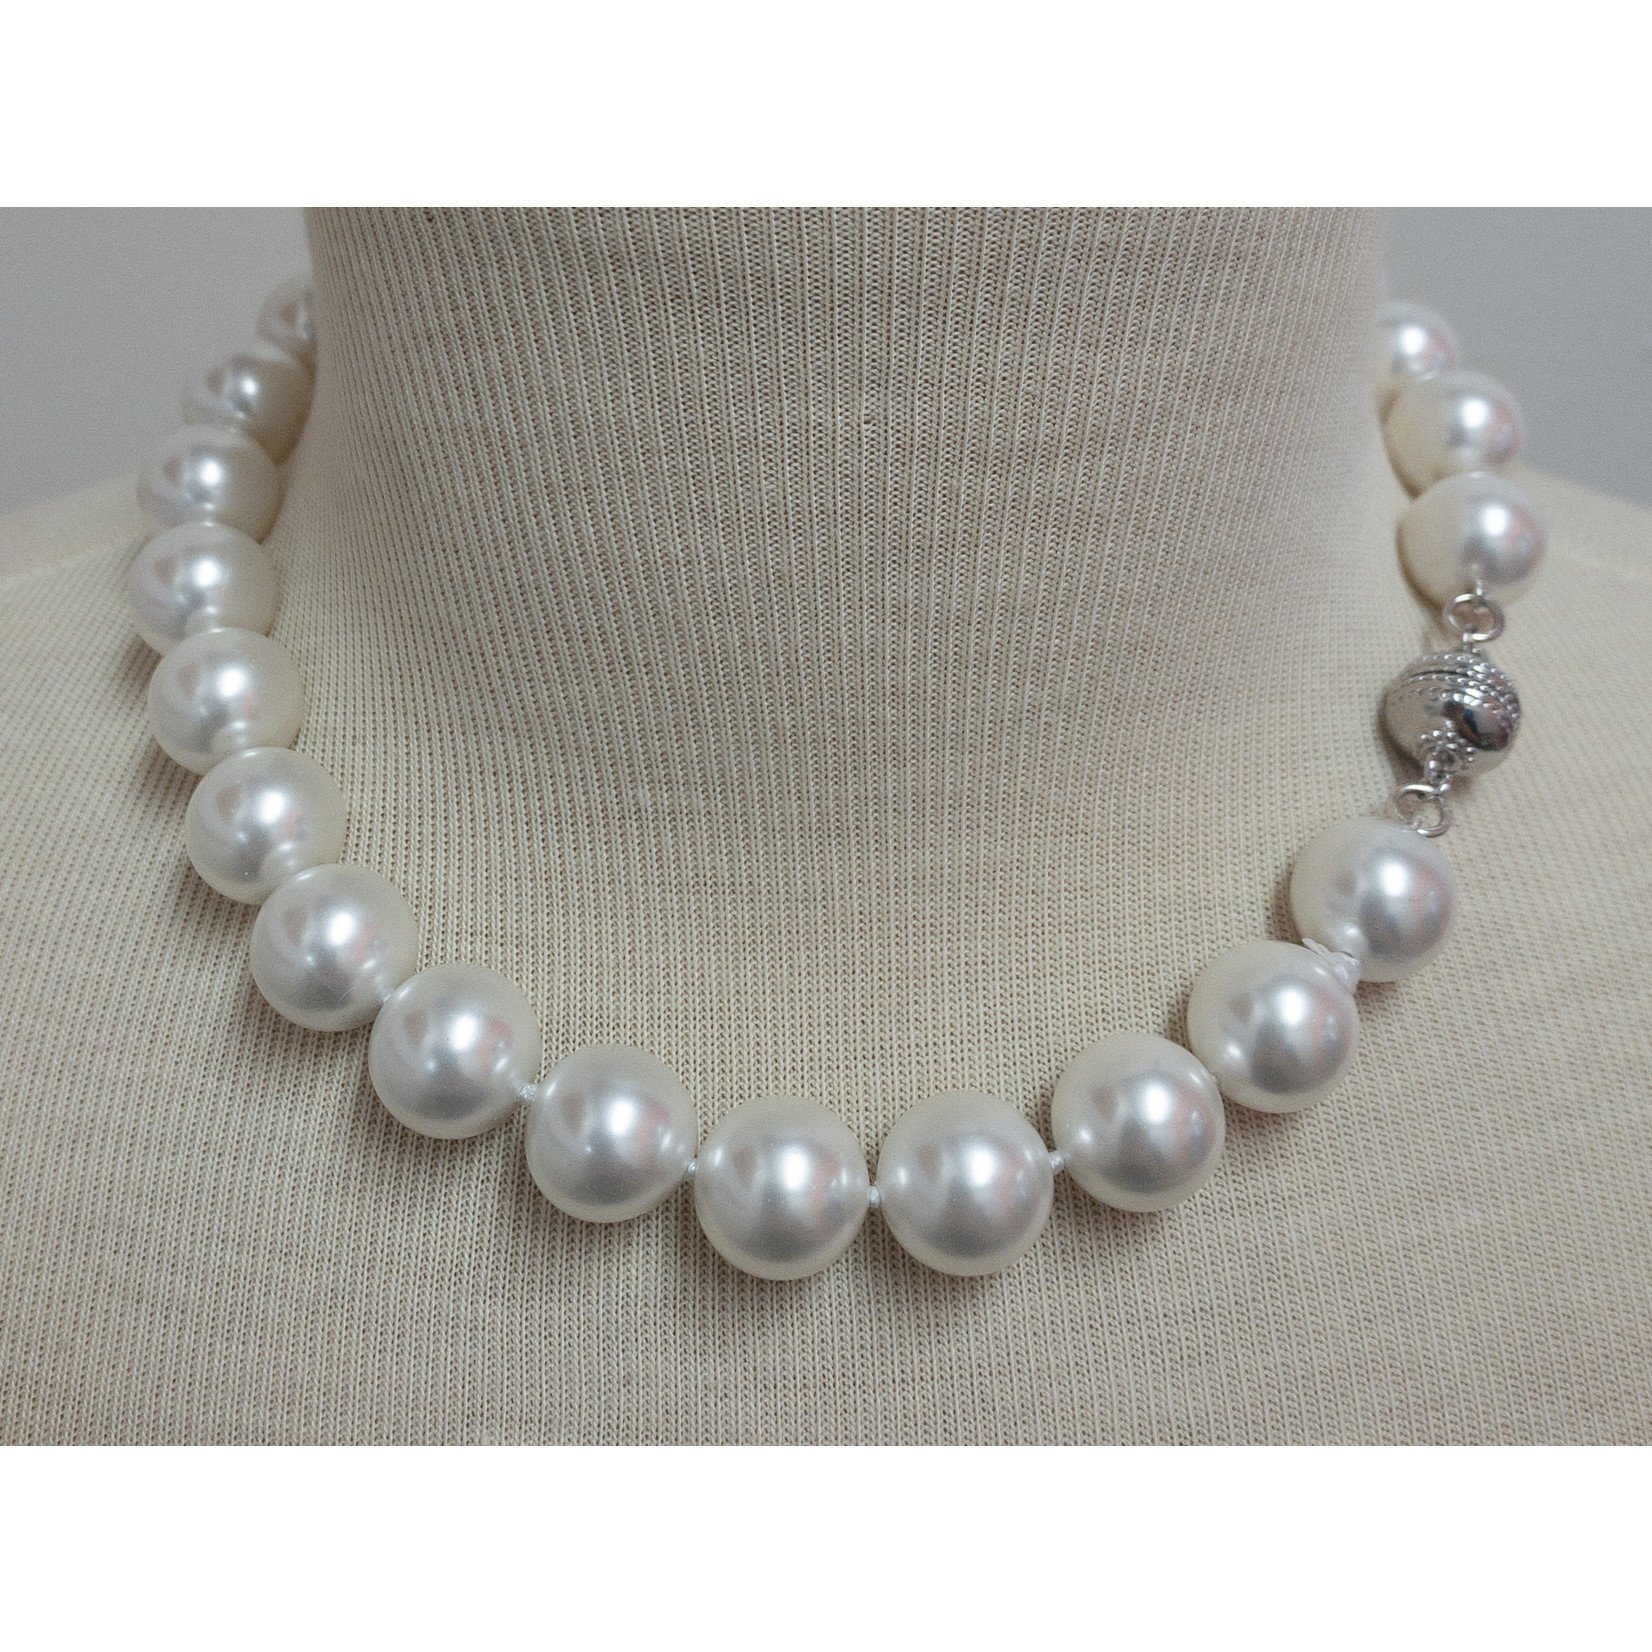 Casuals Fairhope 16" Pearl Necklace with Silver Magnetic Clasp